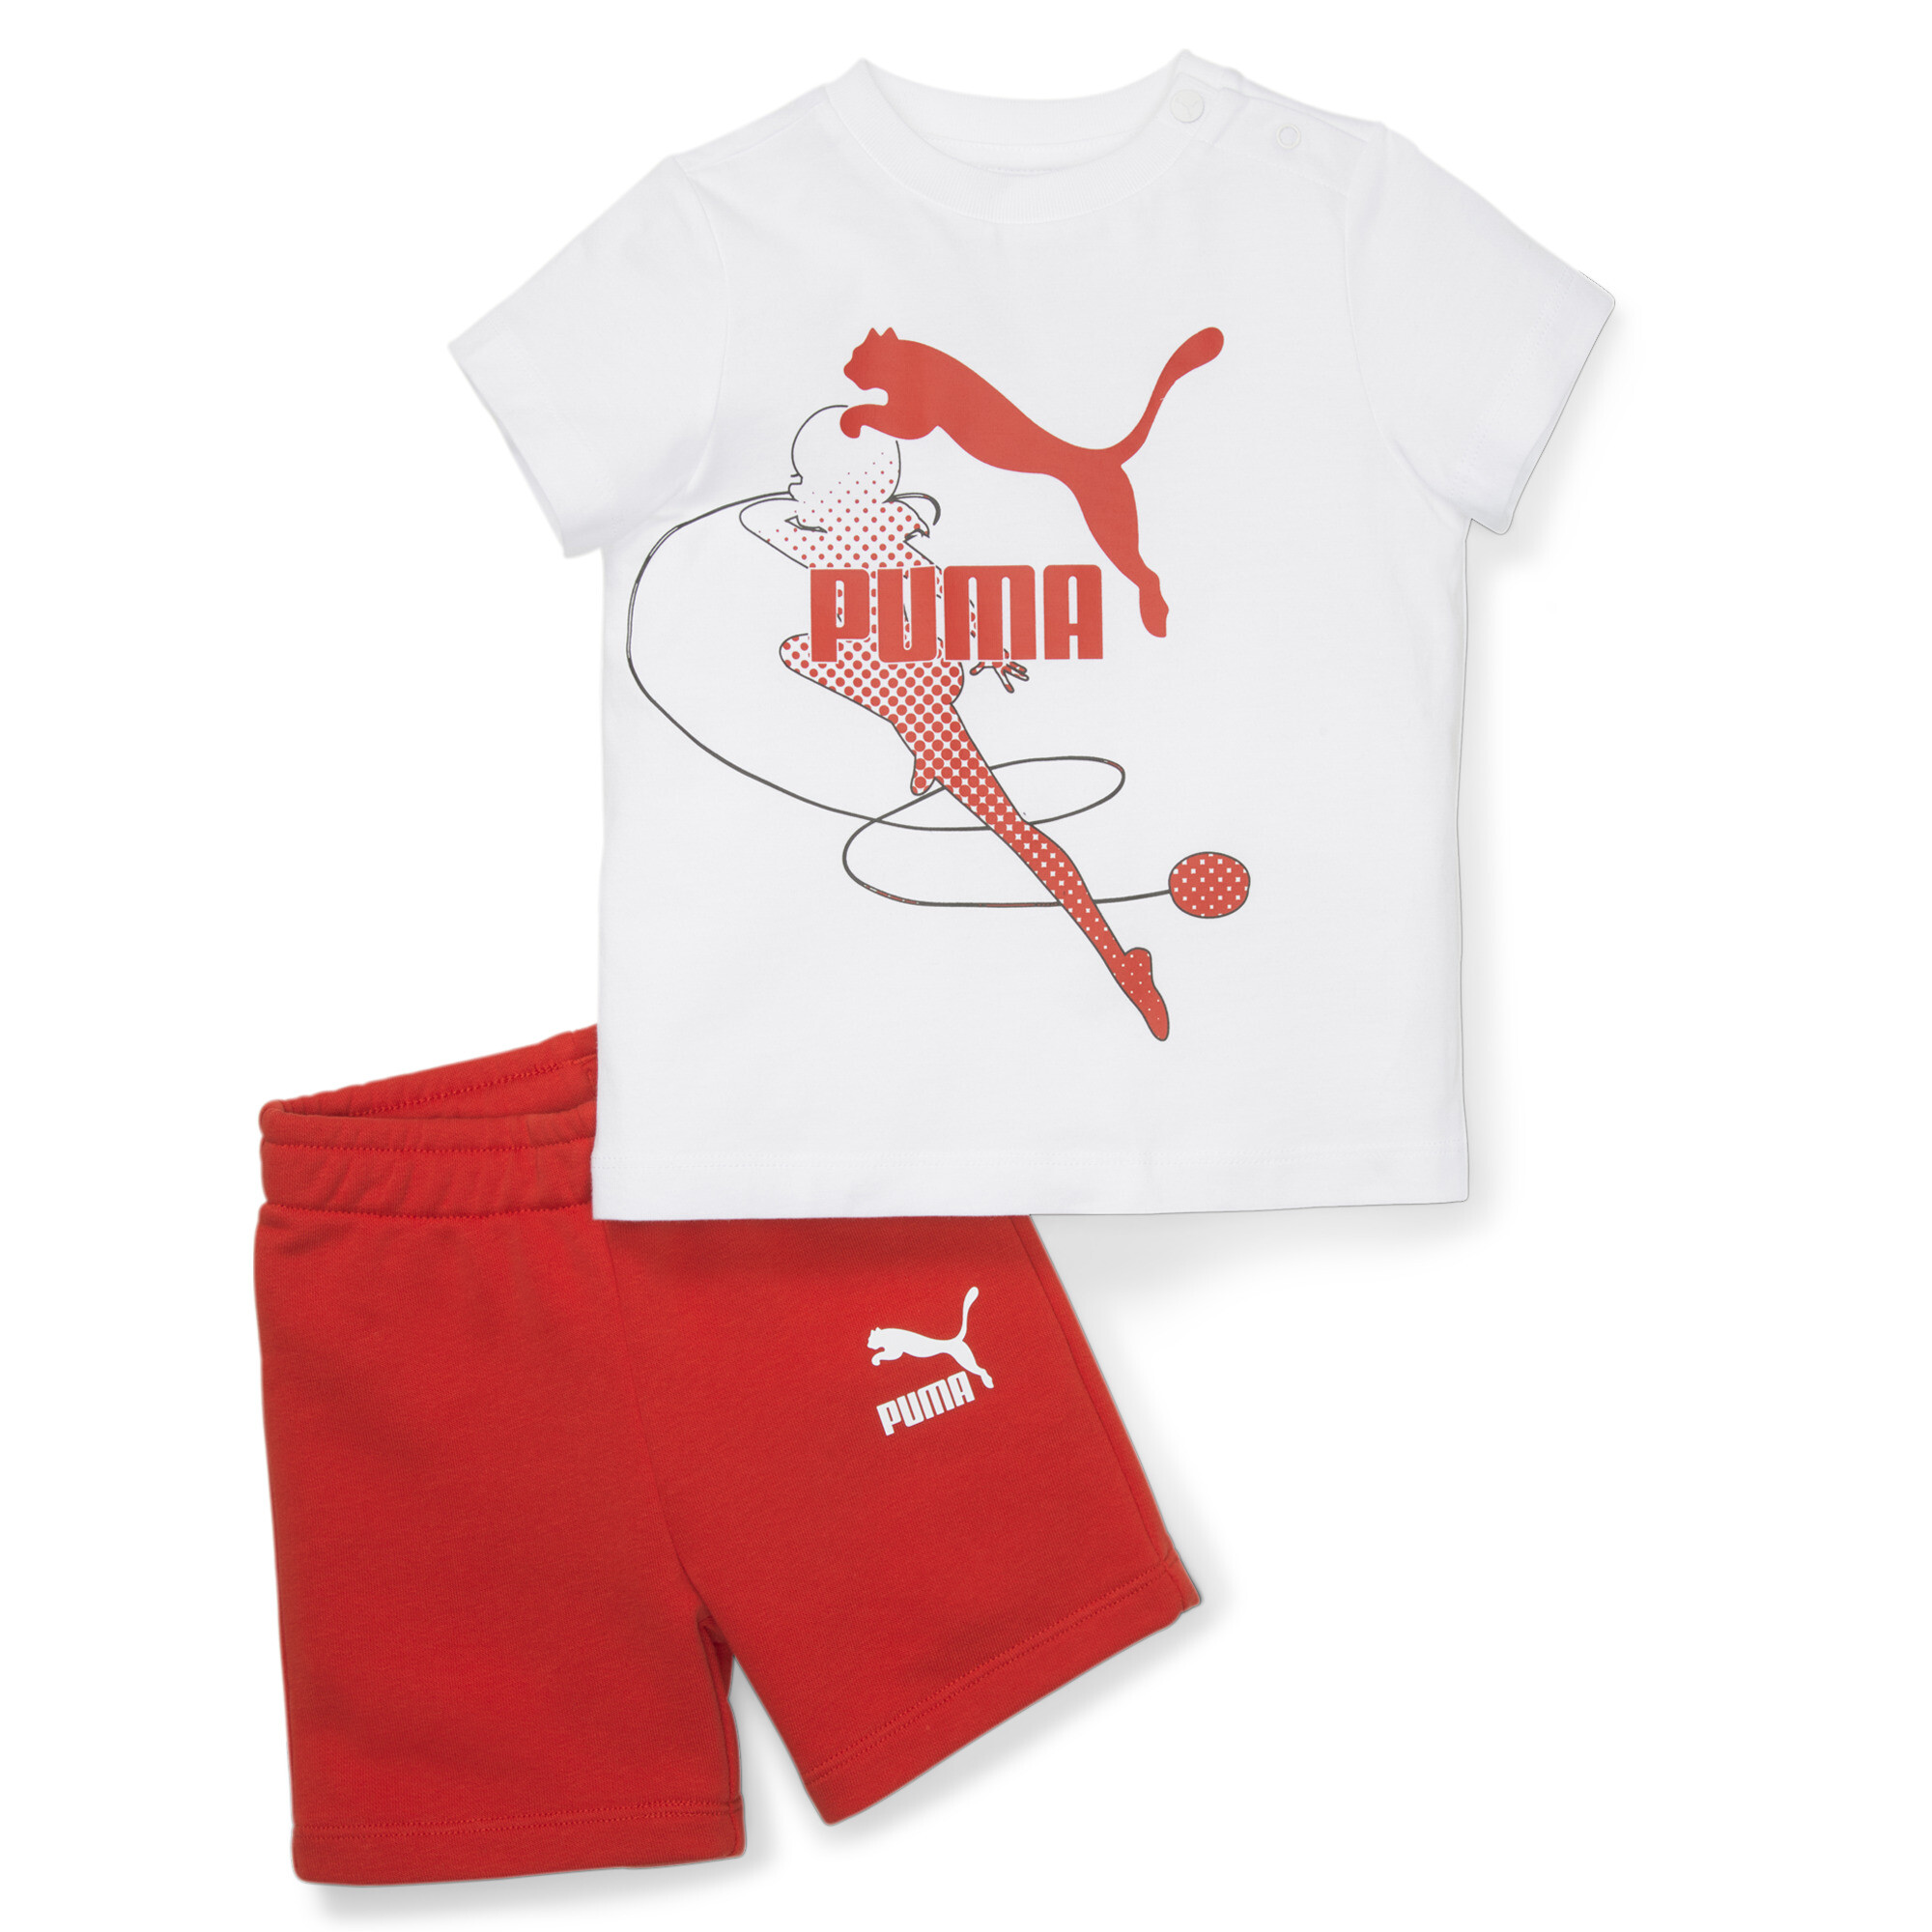 PUMA X MIRACULOUS Set Kids In White, Size 2-4 Months